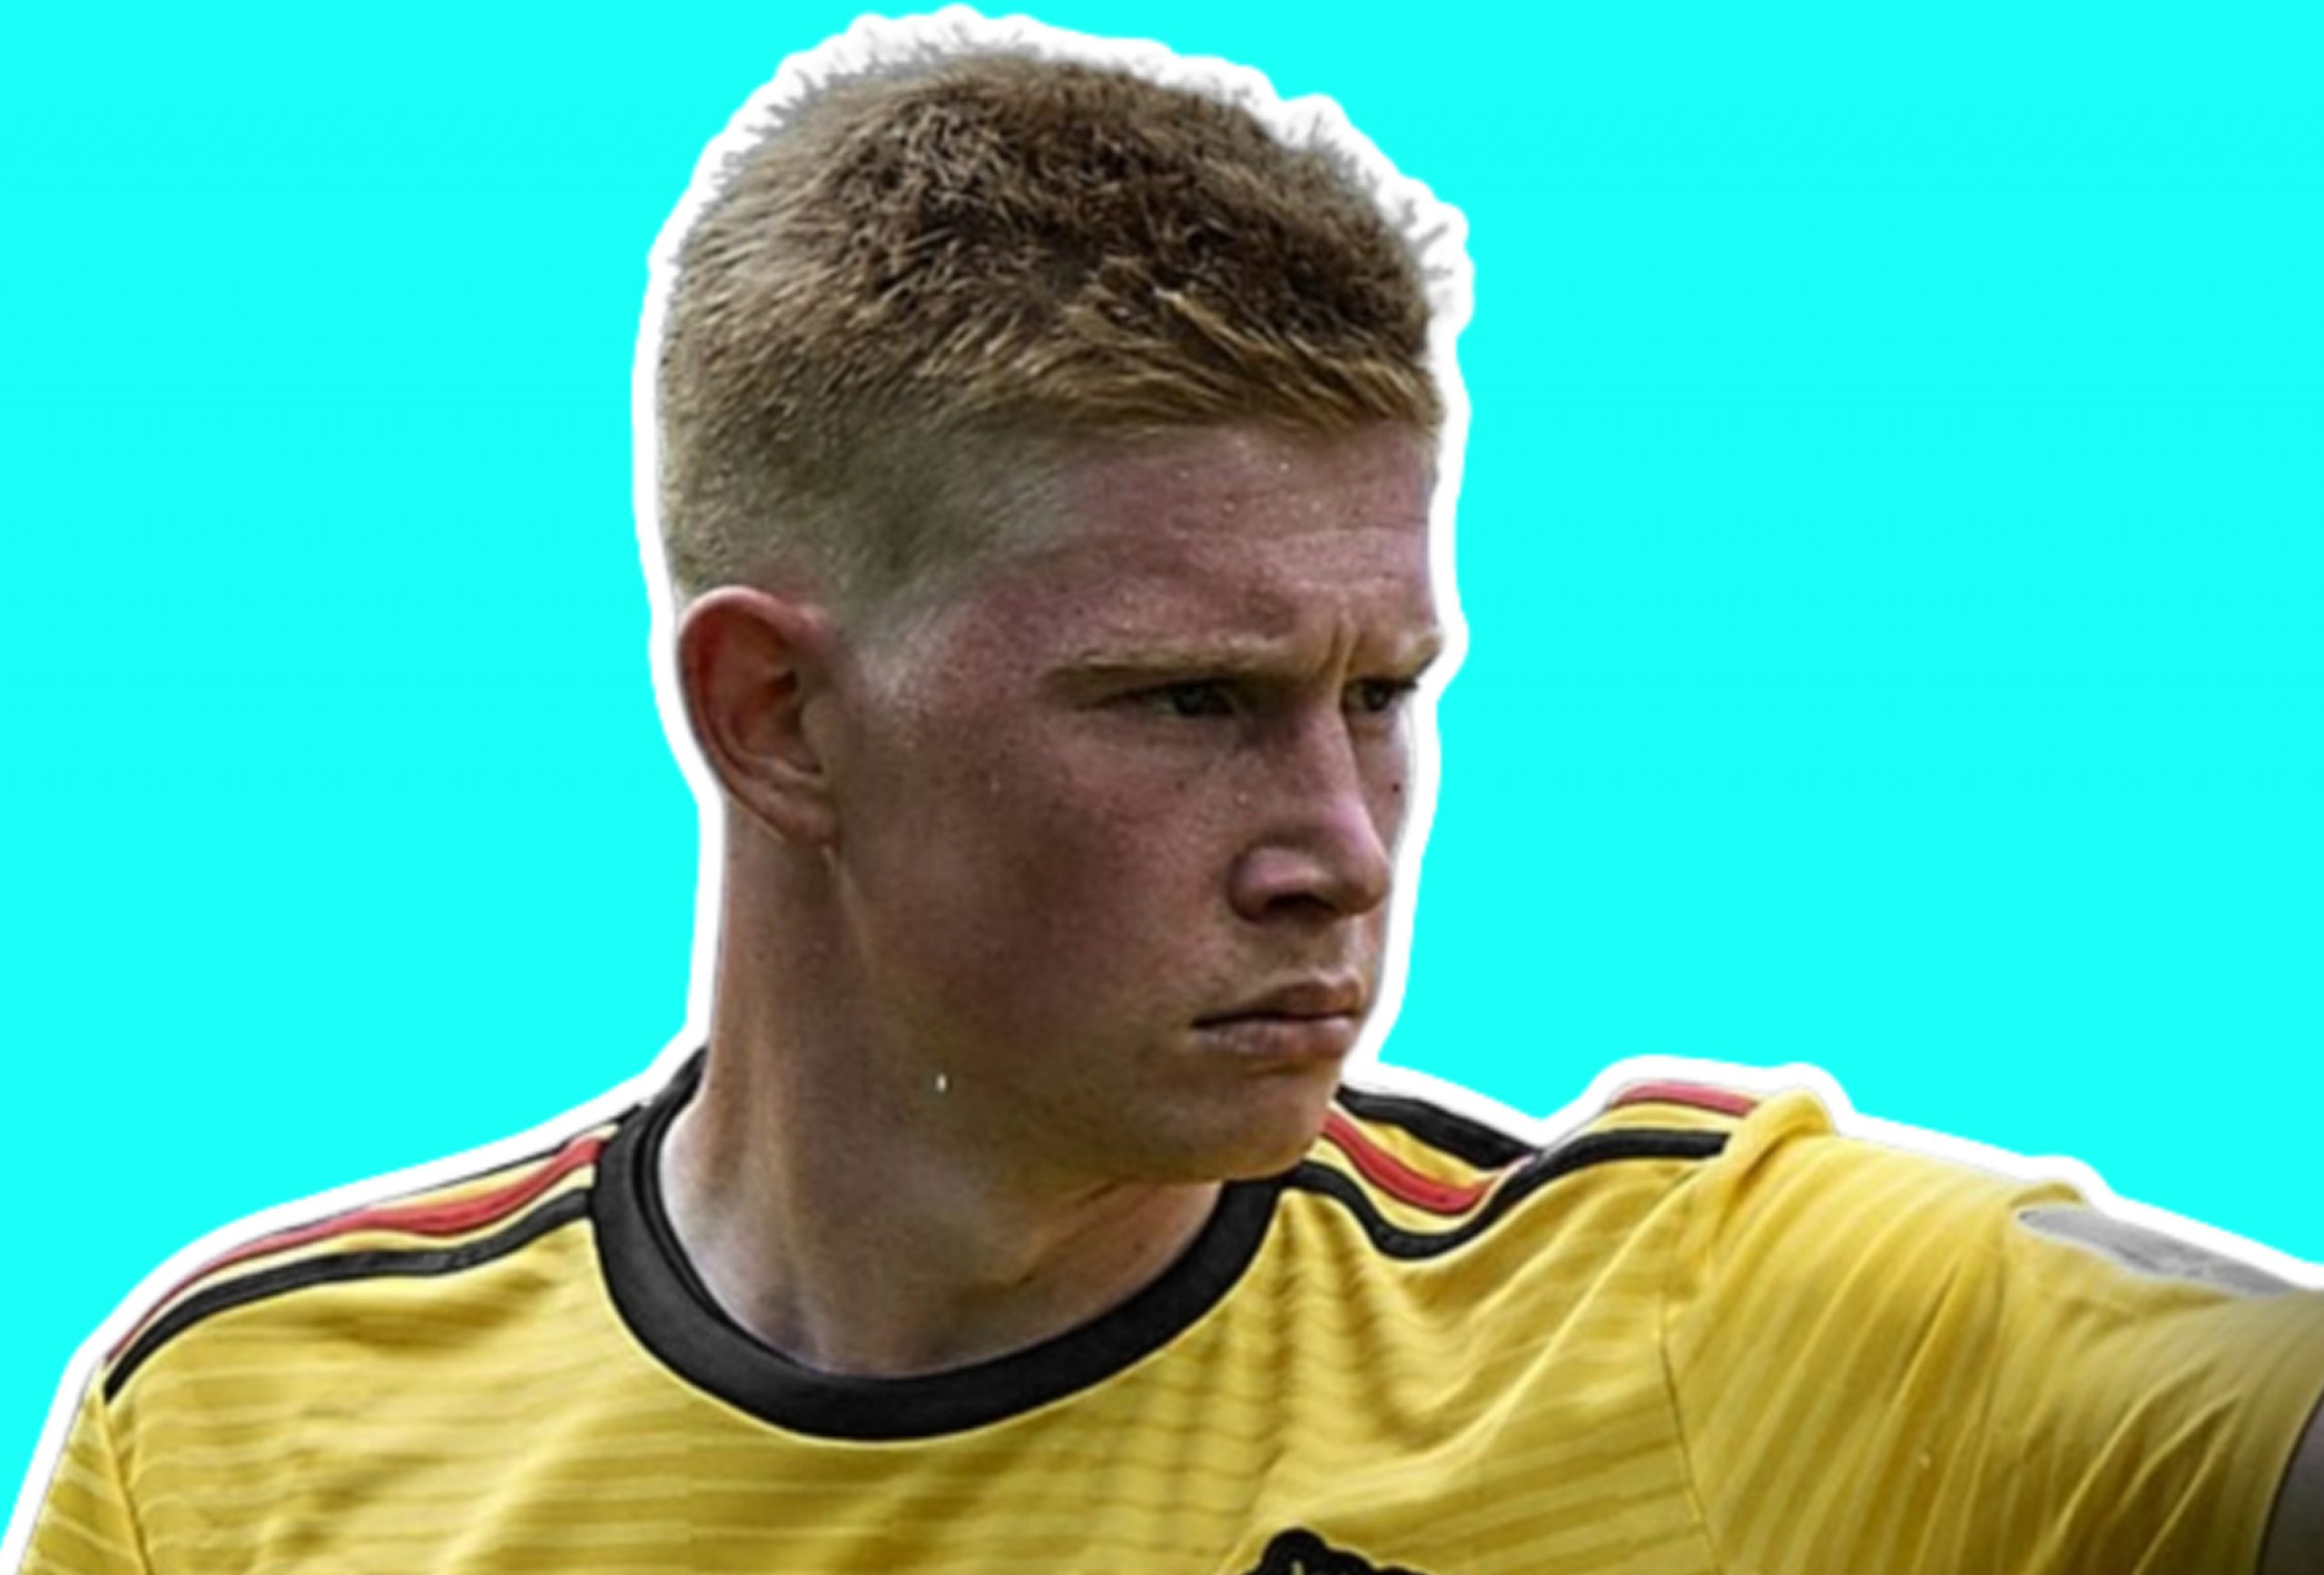 Kevin de Bruyne pulls off an inch-perfect outside of the boot through ball against England